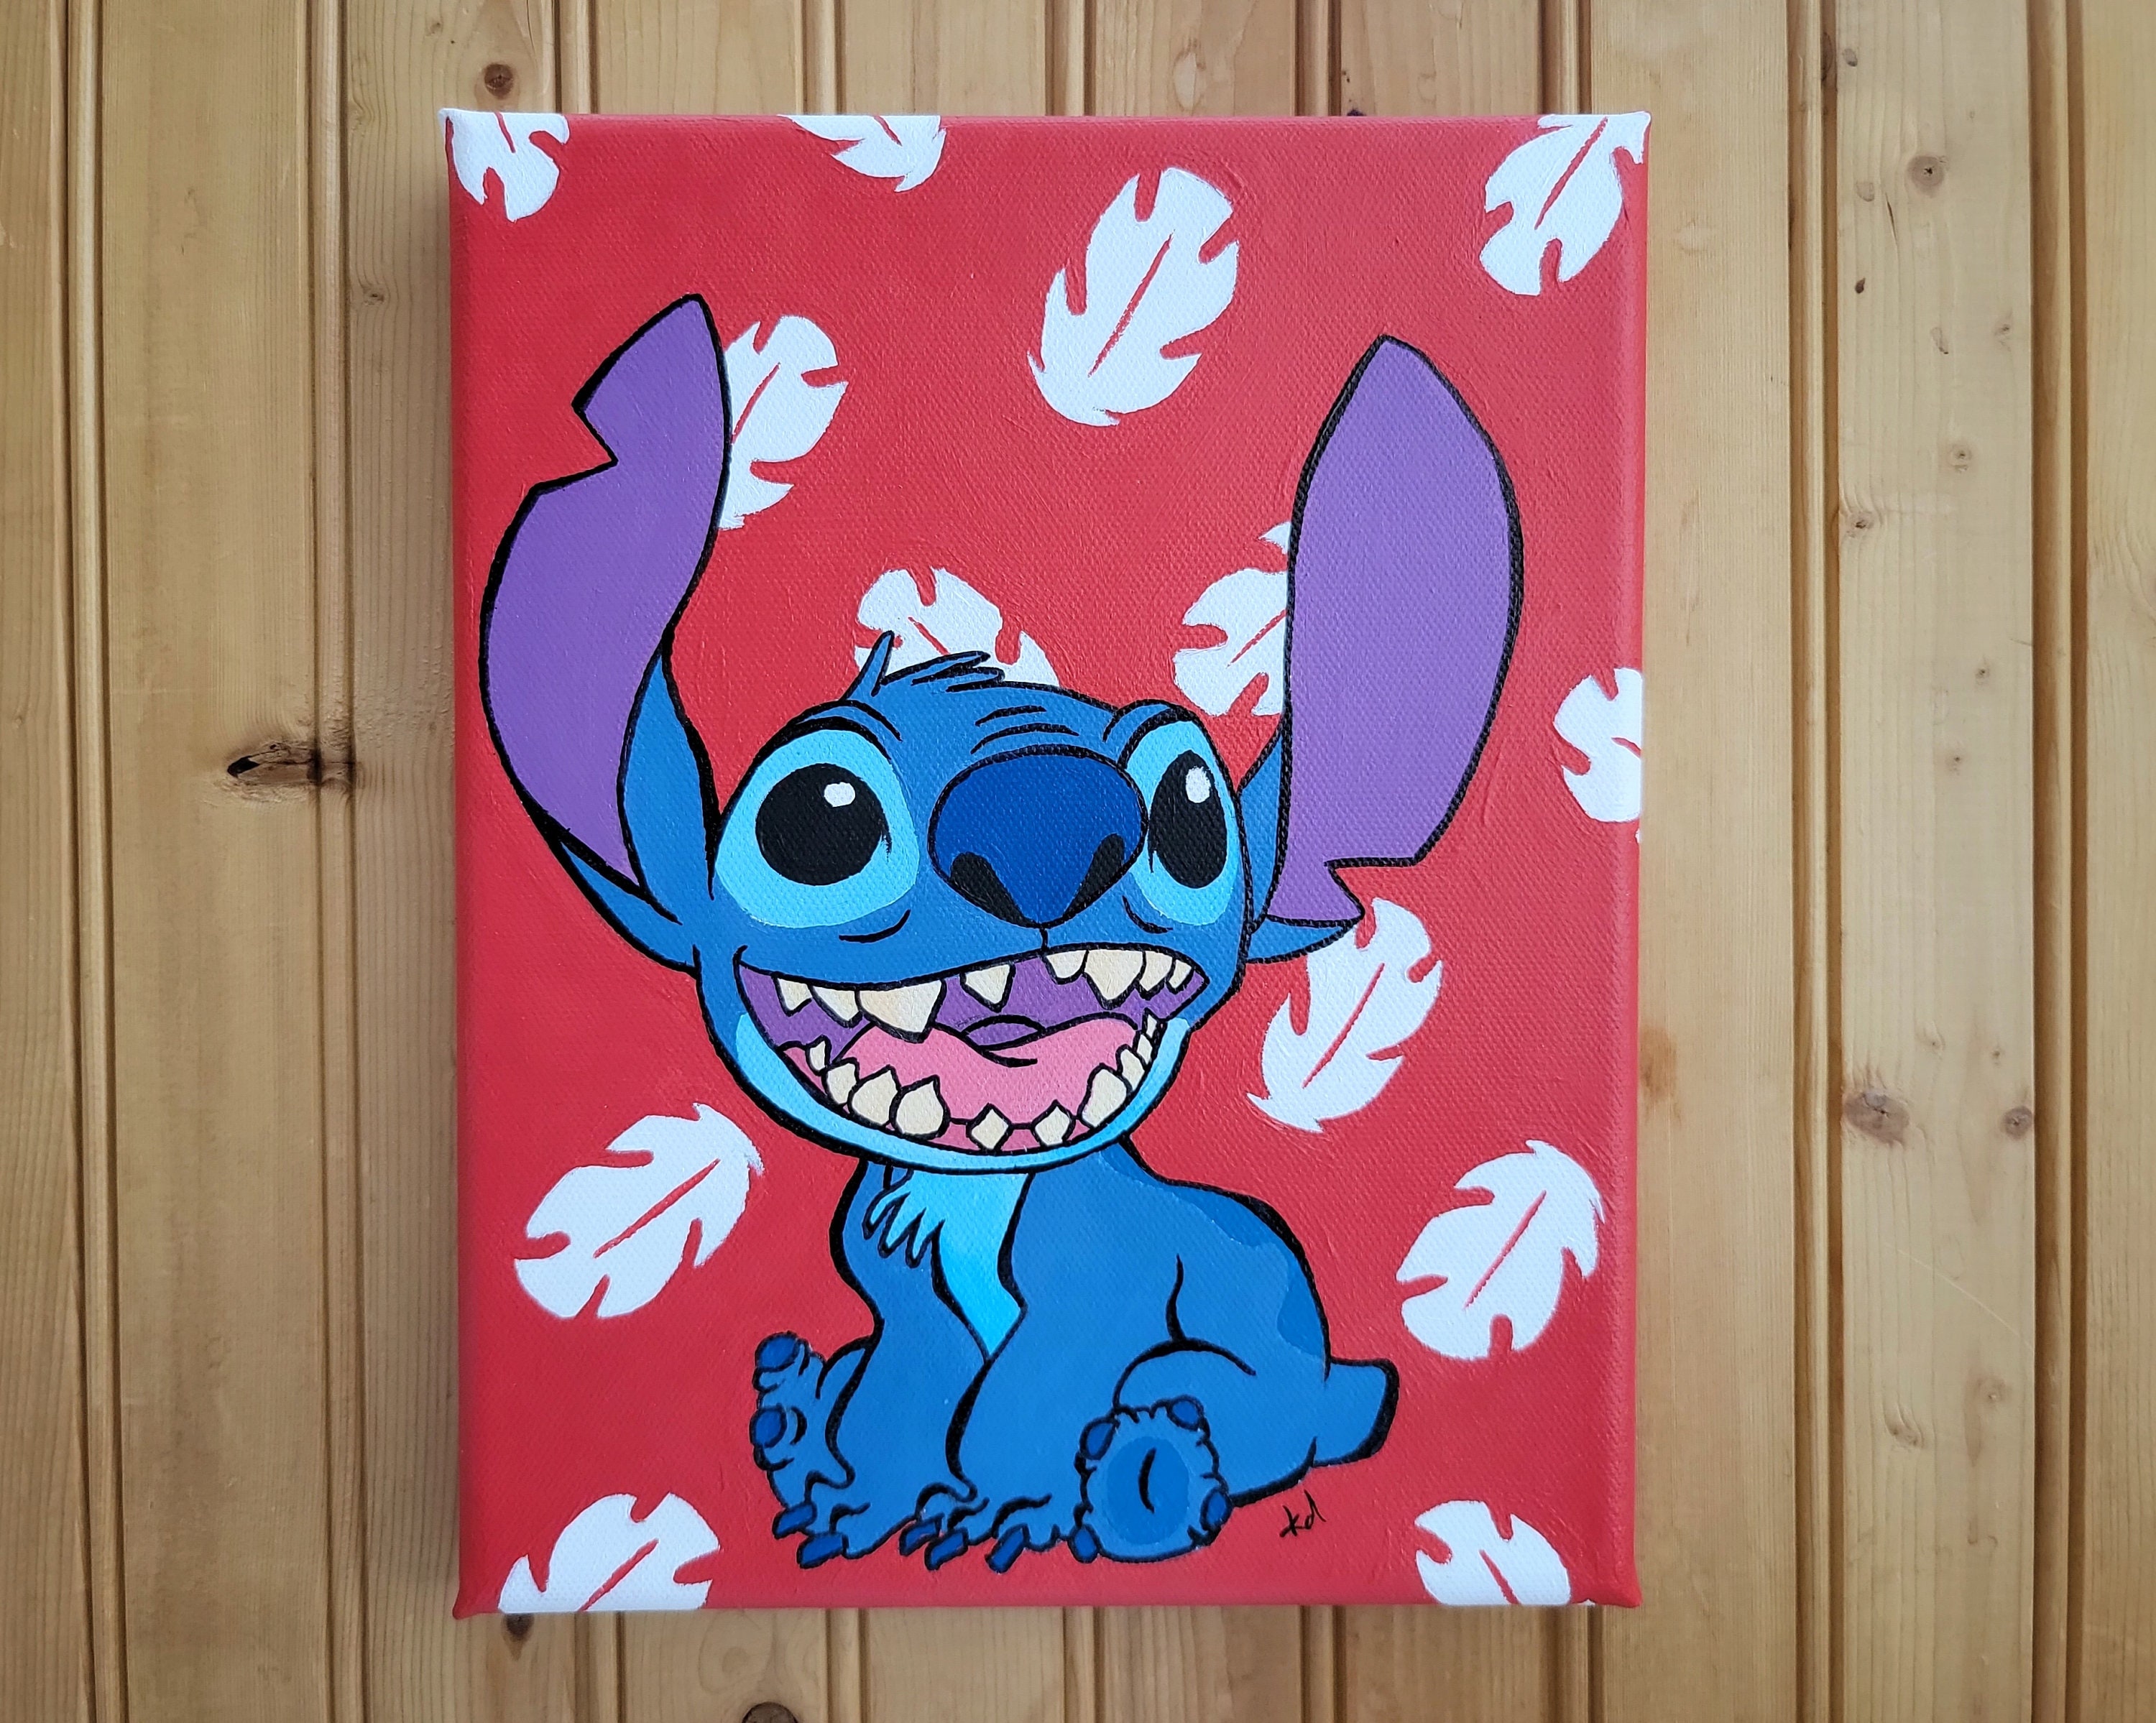 Super Stitch Underwear on Head Sticking Out Tongue Acrylic Painting 8x10  Silly Cute Painting Wall Art Room Decor -  Canada